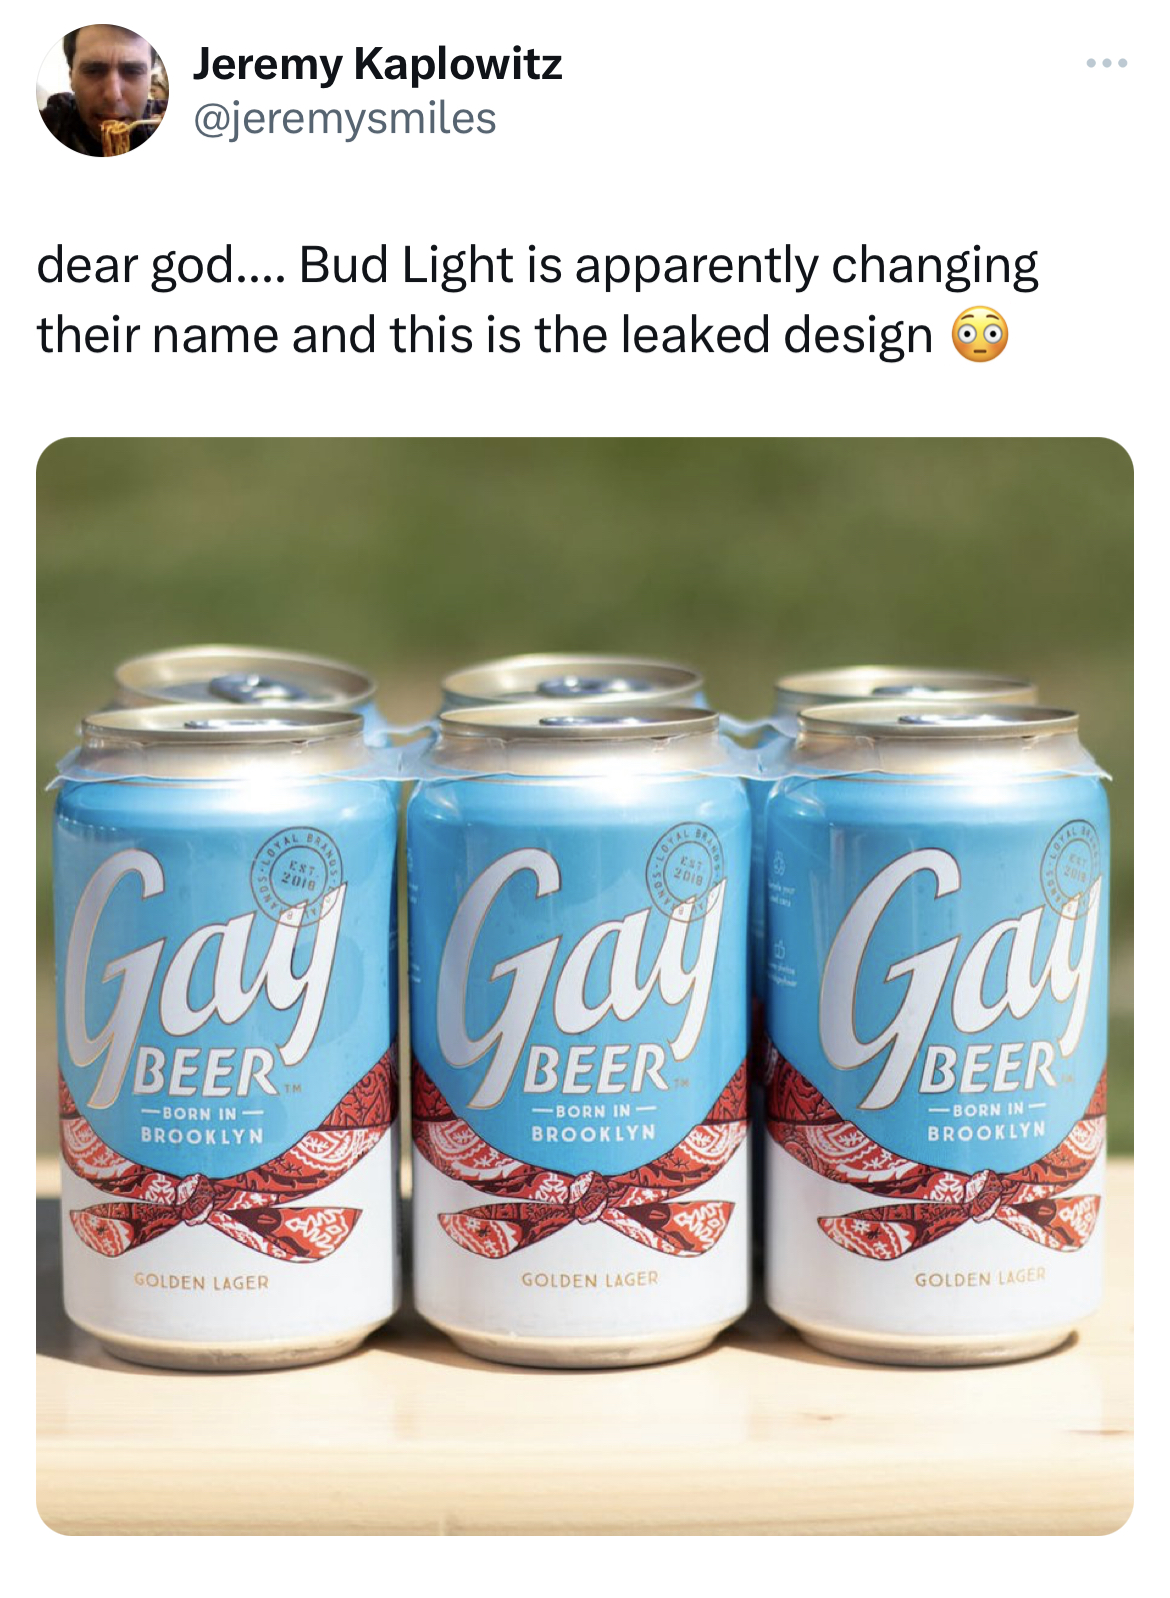 savage and salty tweets - gay beer - Jeremy Kaplowitz dear god.... Bud Light is apparently changing their name and this is the leaked design Gay Gay Gay 10 Brookly Dan 2010 Brooklyn in Brooklyn Solden Lager Golden Lager